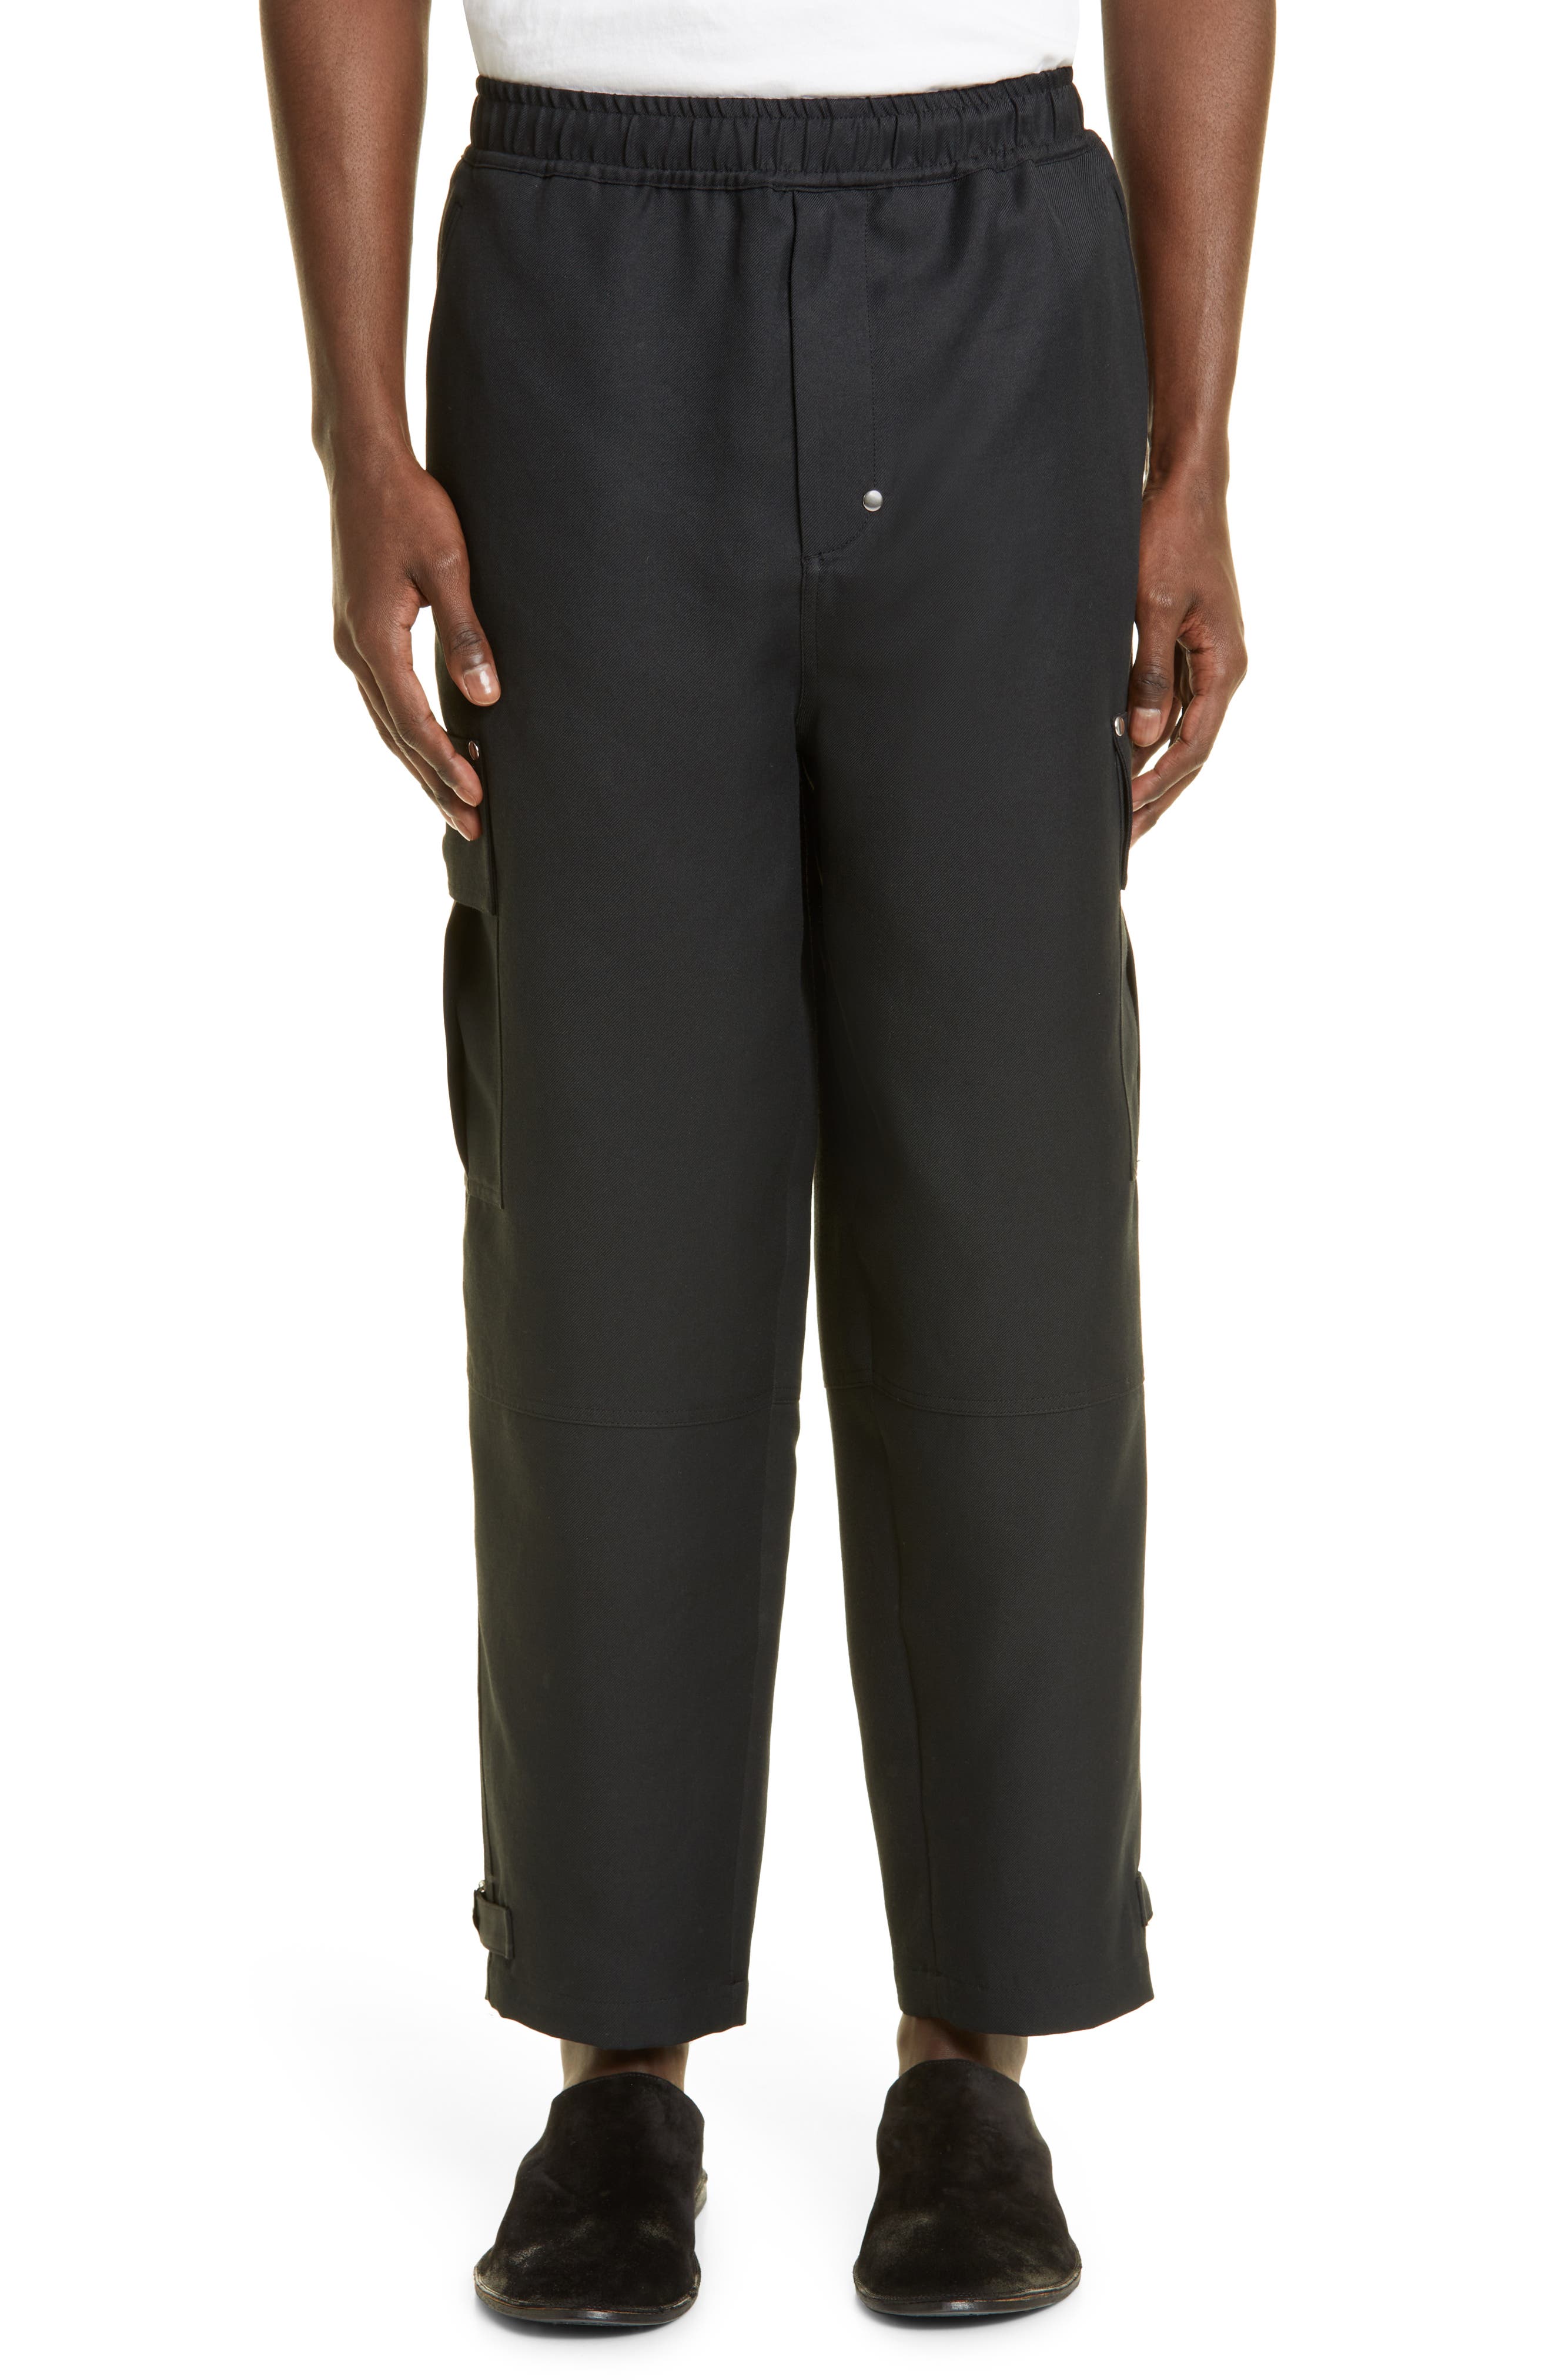 JW Anderson Twill Cargo Pants in Black at Nordstrom, Size 38 Us